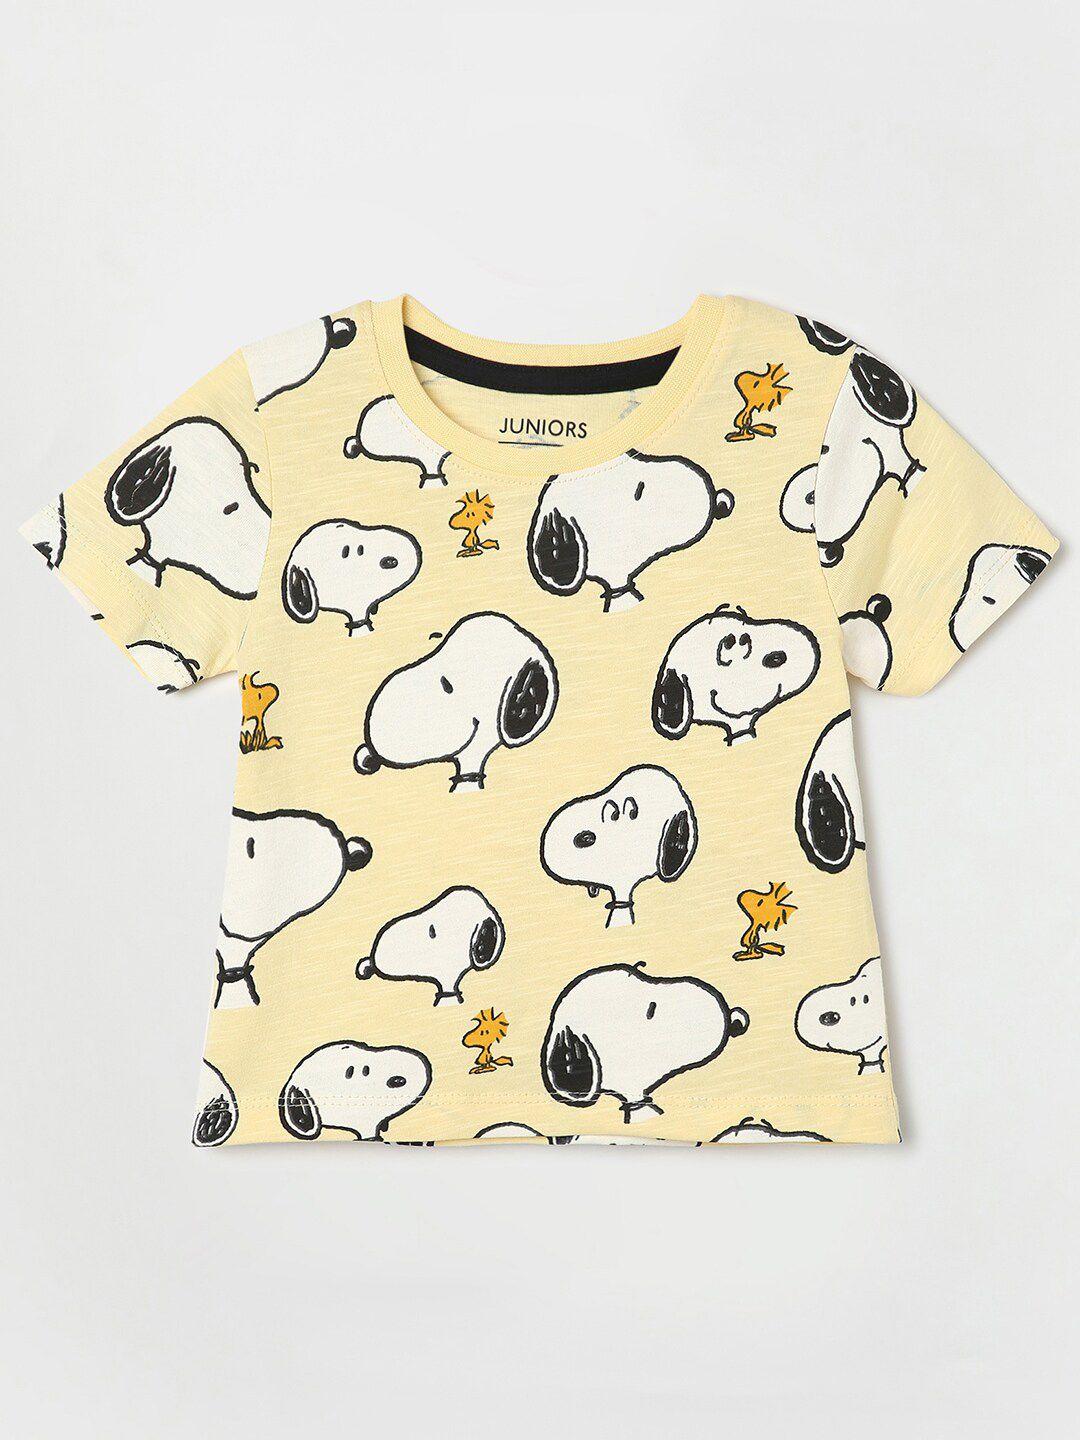 juniors by lifestyle boys humor and comic printed snoopy cotton t-shirt